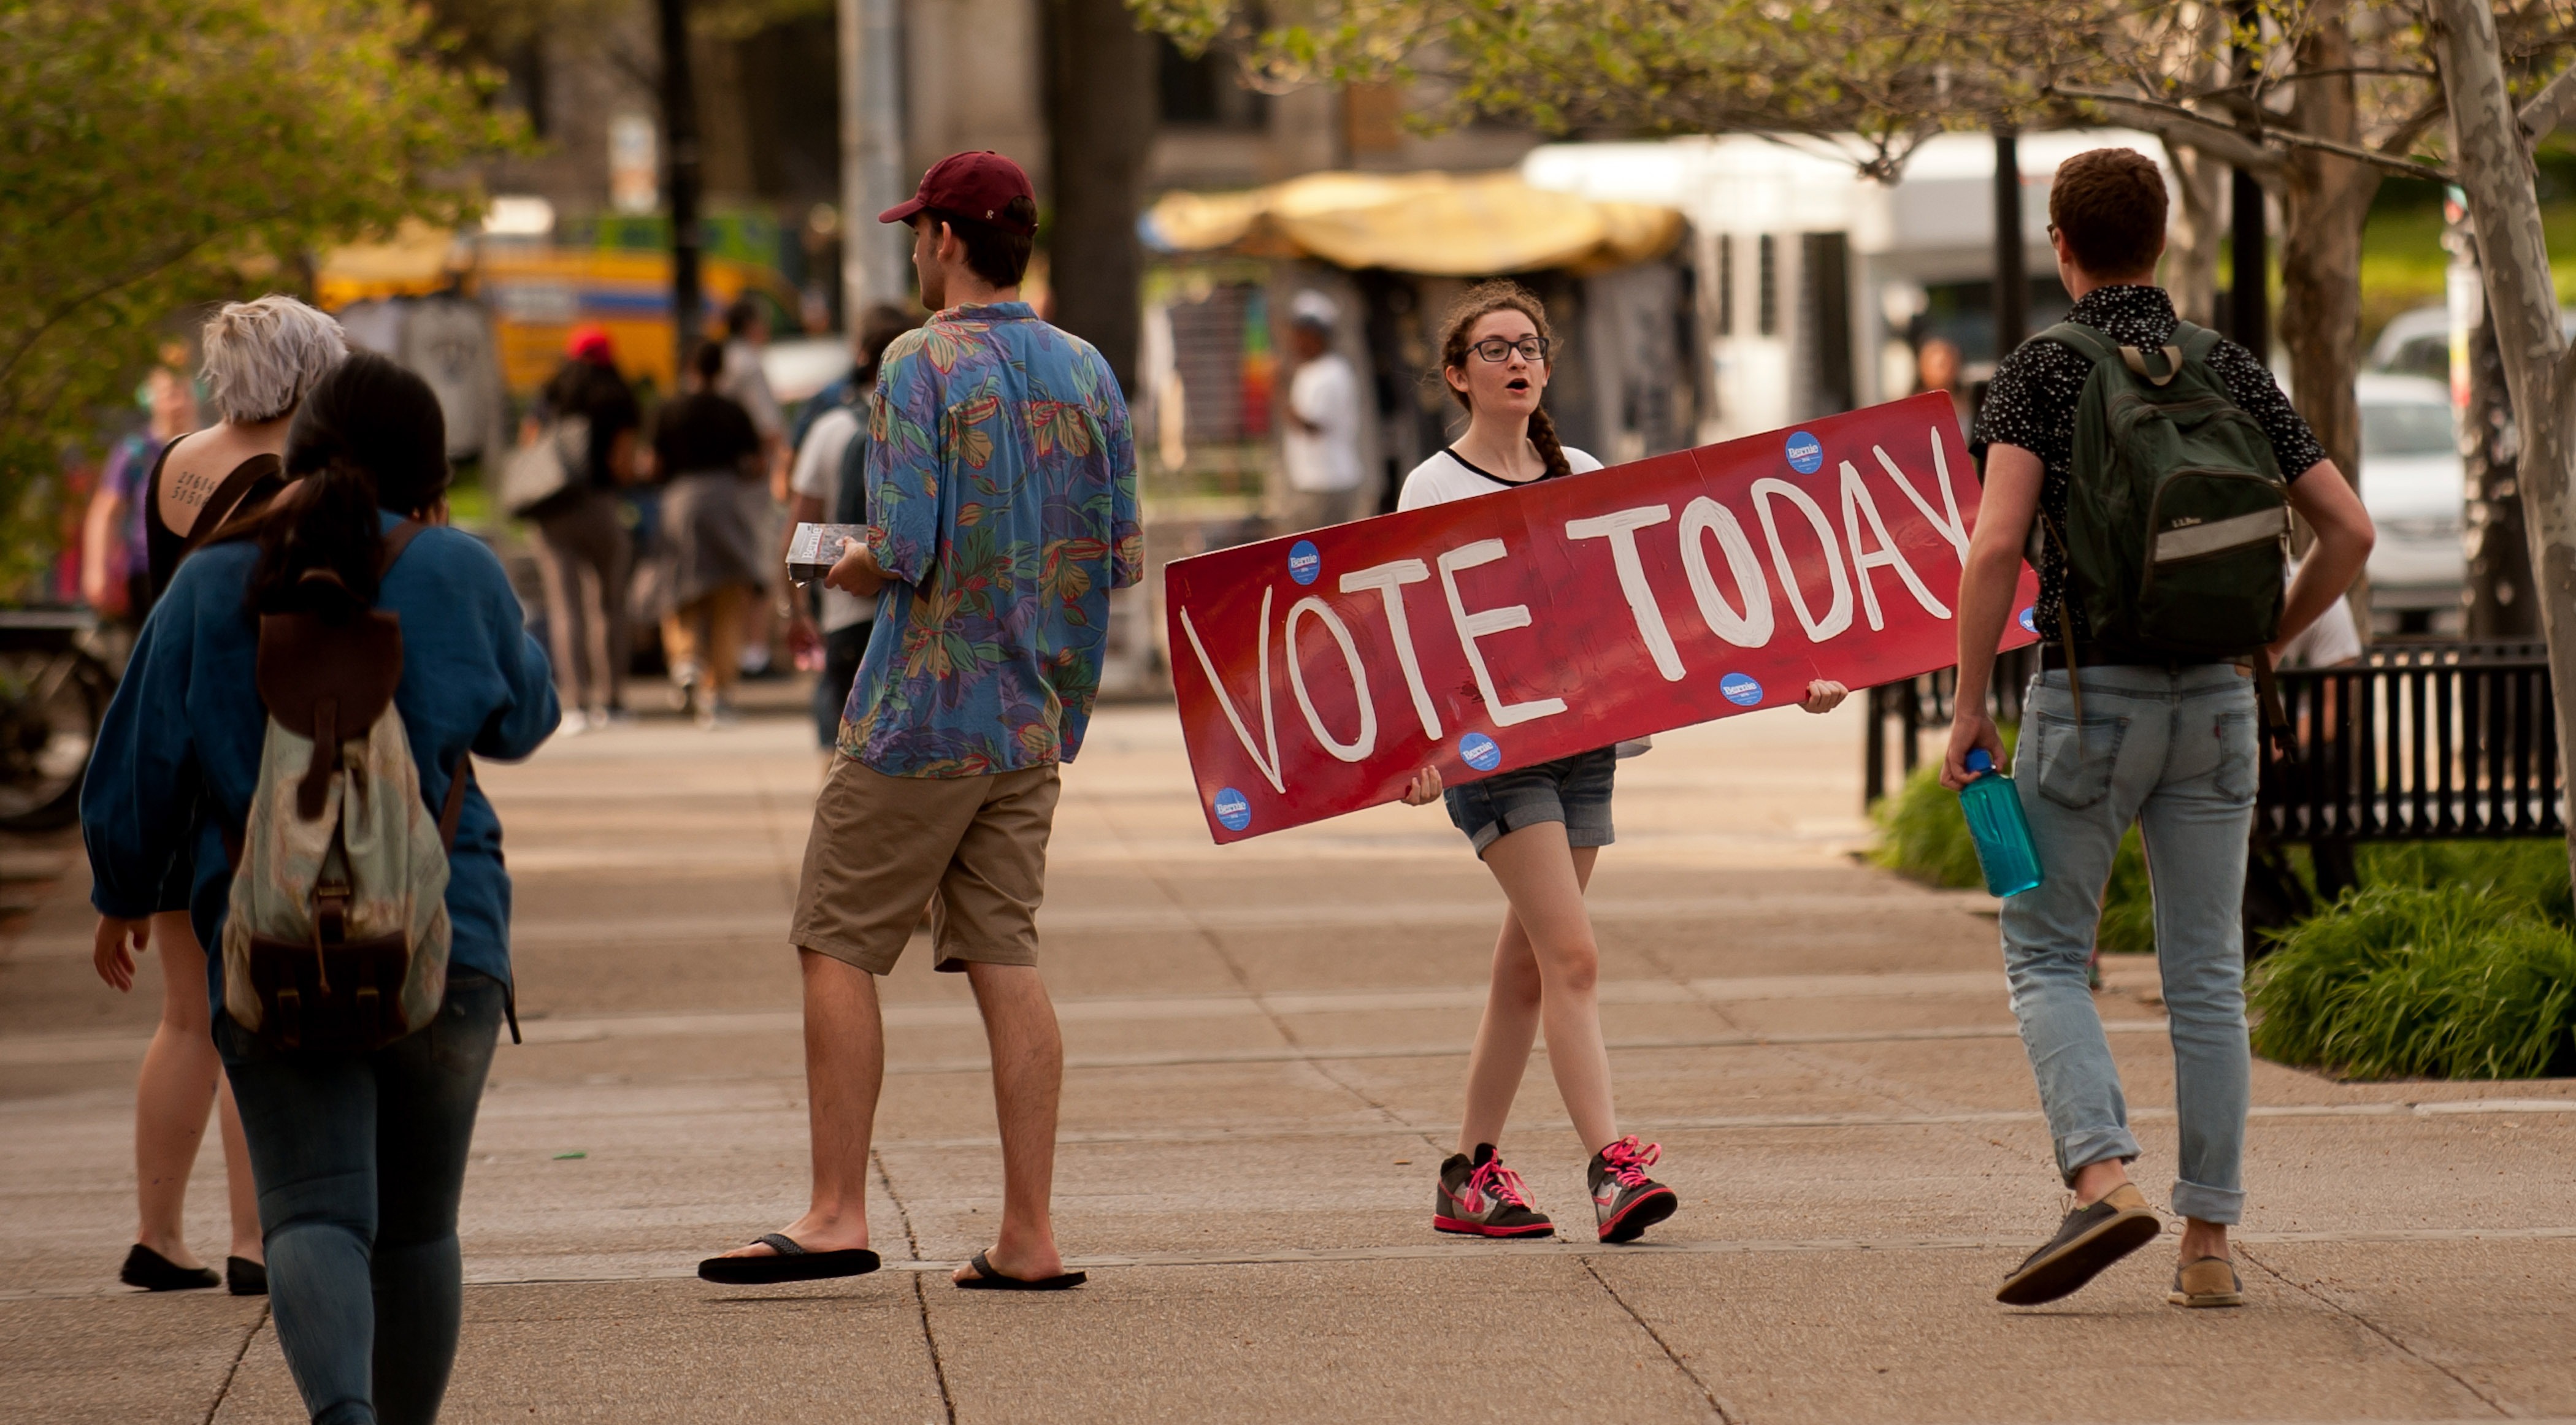 Bernie Sanders supporter Maria DelGrande implores passersby to vote in the Pennsylvania primary election on April 26, 2016 in Pittsburgh, Pennsylvania. (Jeff Swensen—Getty Images)